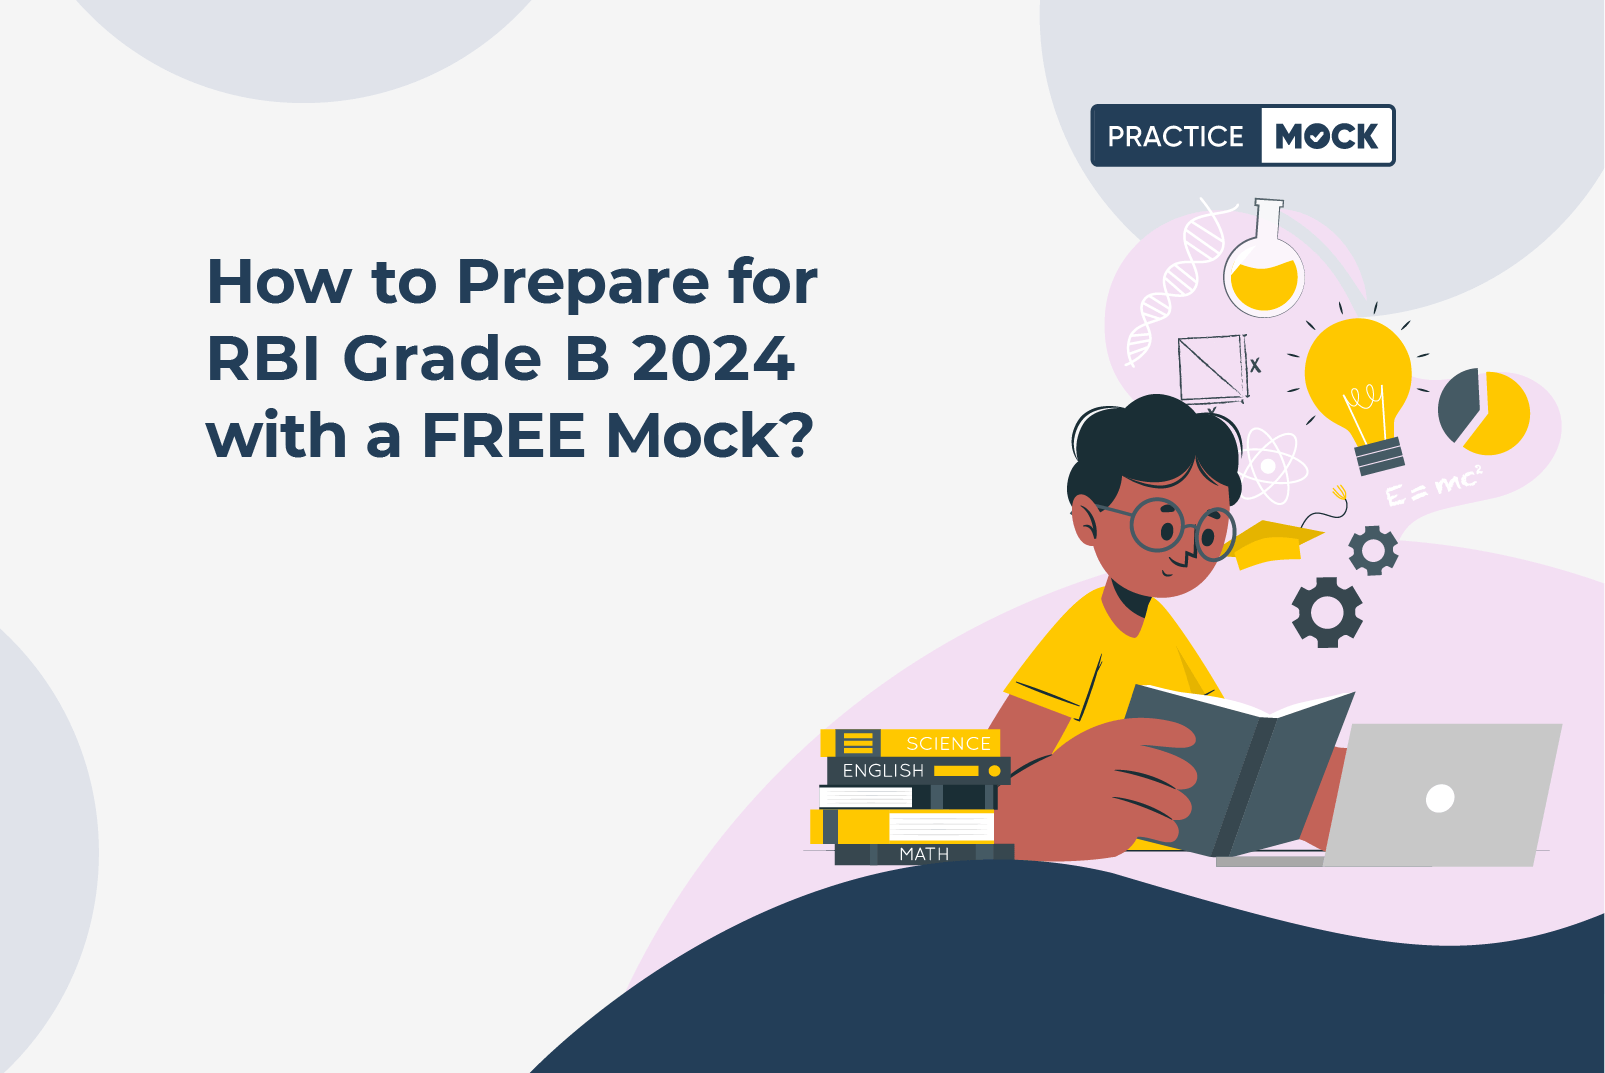 How to Prepare for RBI Grade B 2024 with a FREE Mock